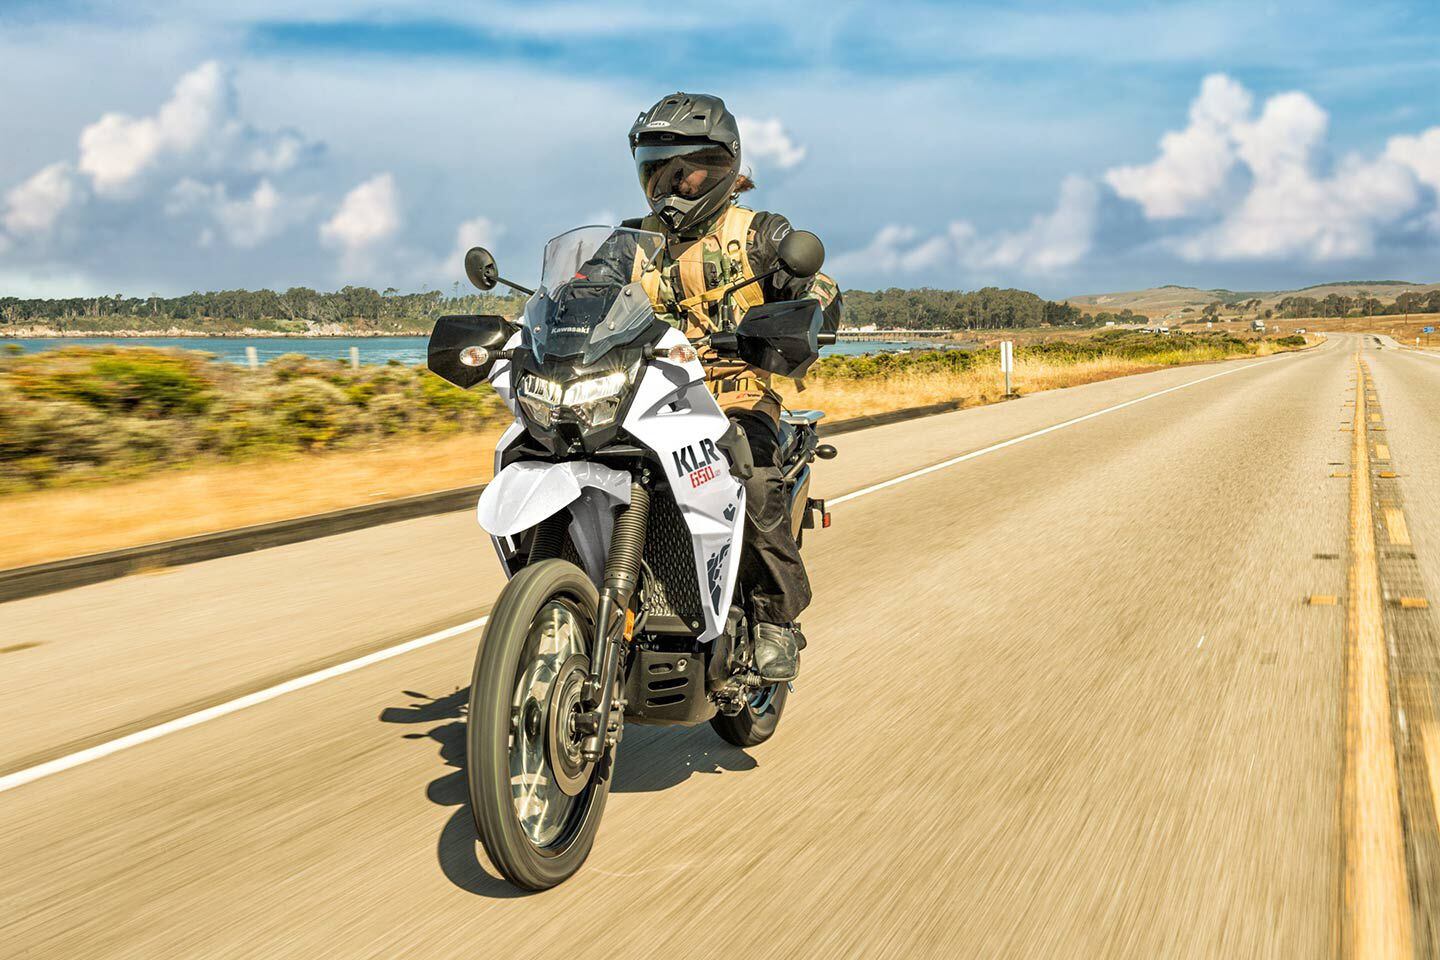 Kawasaki will continue to offer its S version of the KLR650 for riders with shorter inseams.